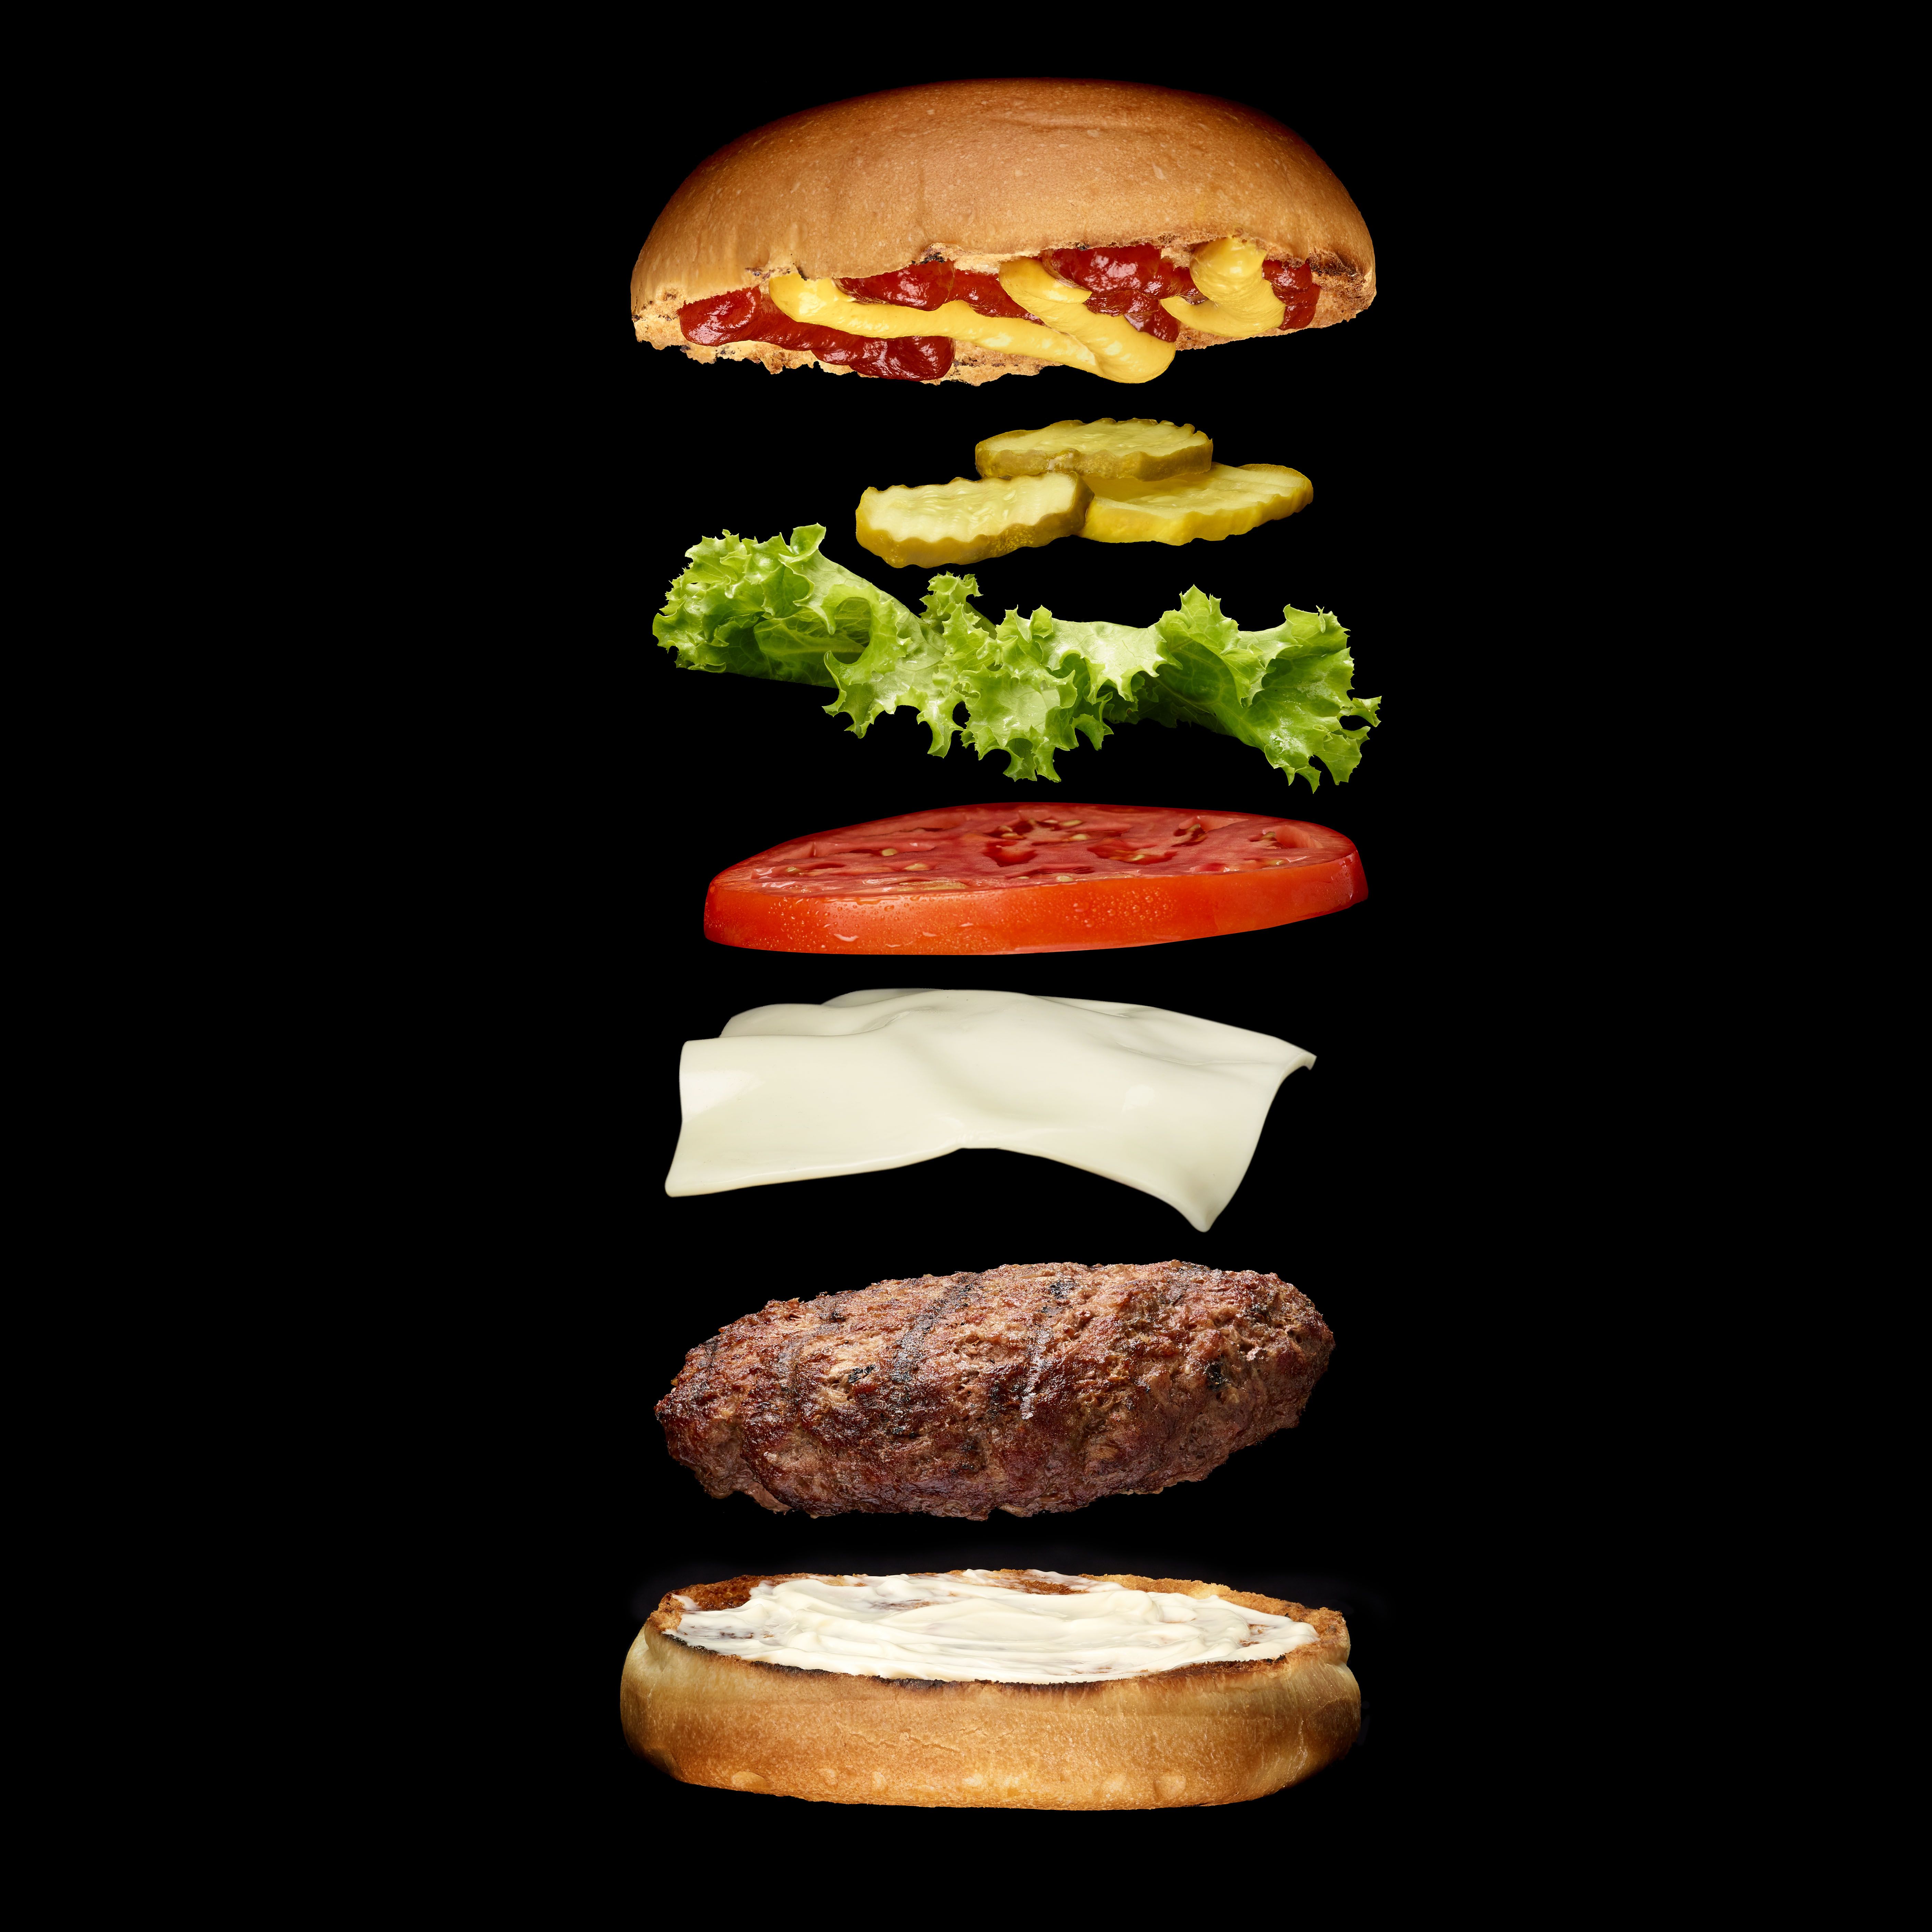 Ultimate Burger Grill Guide: An Easy Guide How to Grill the Perfect Burger